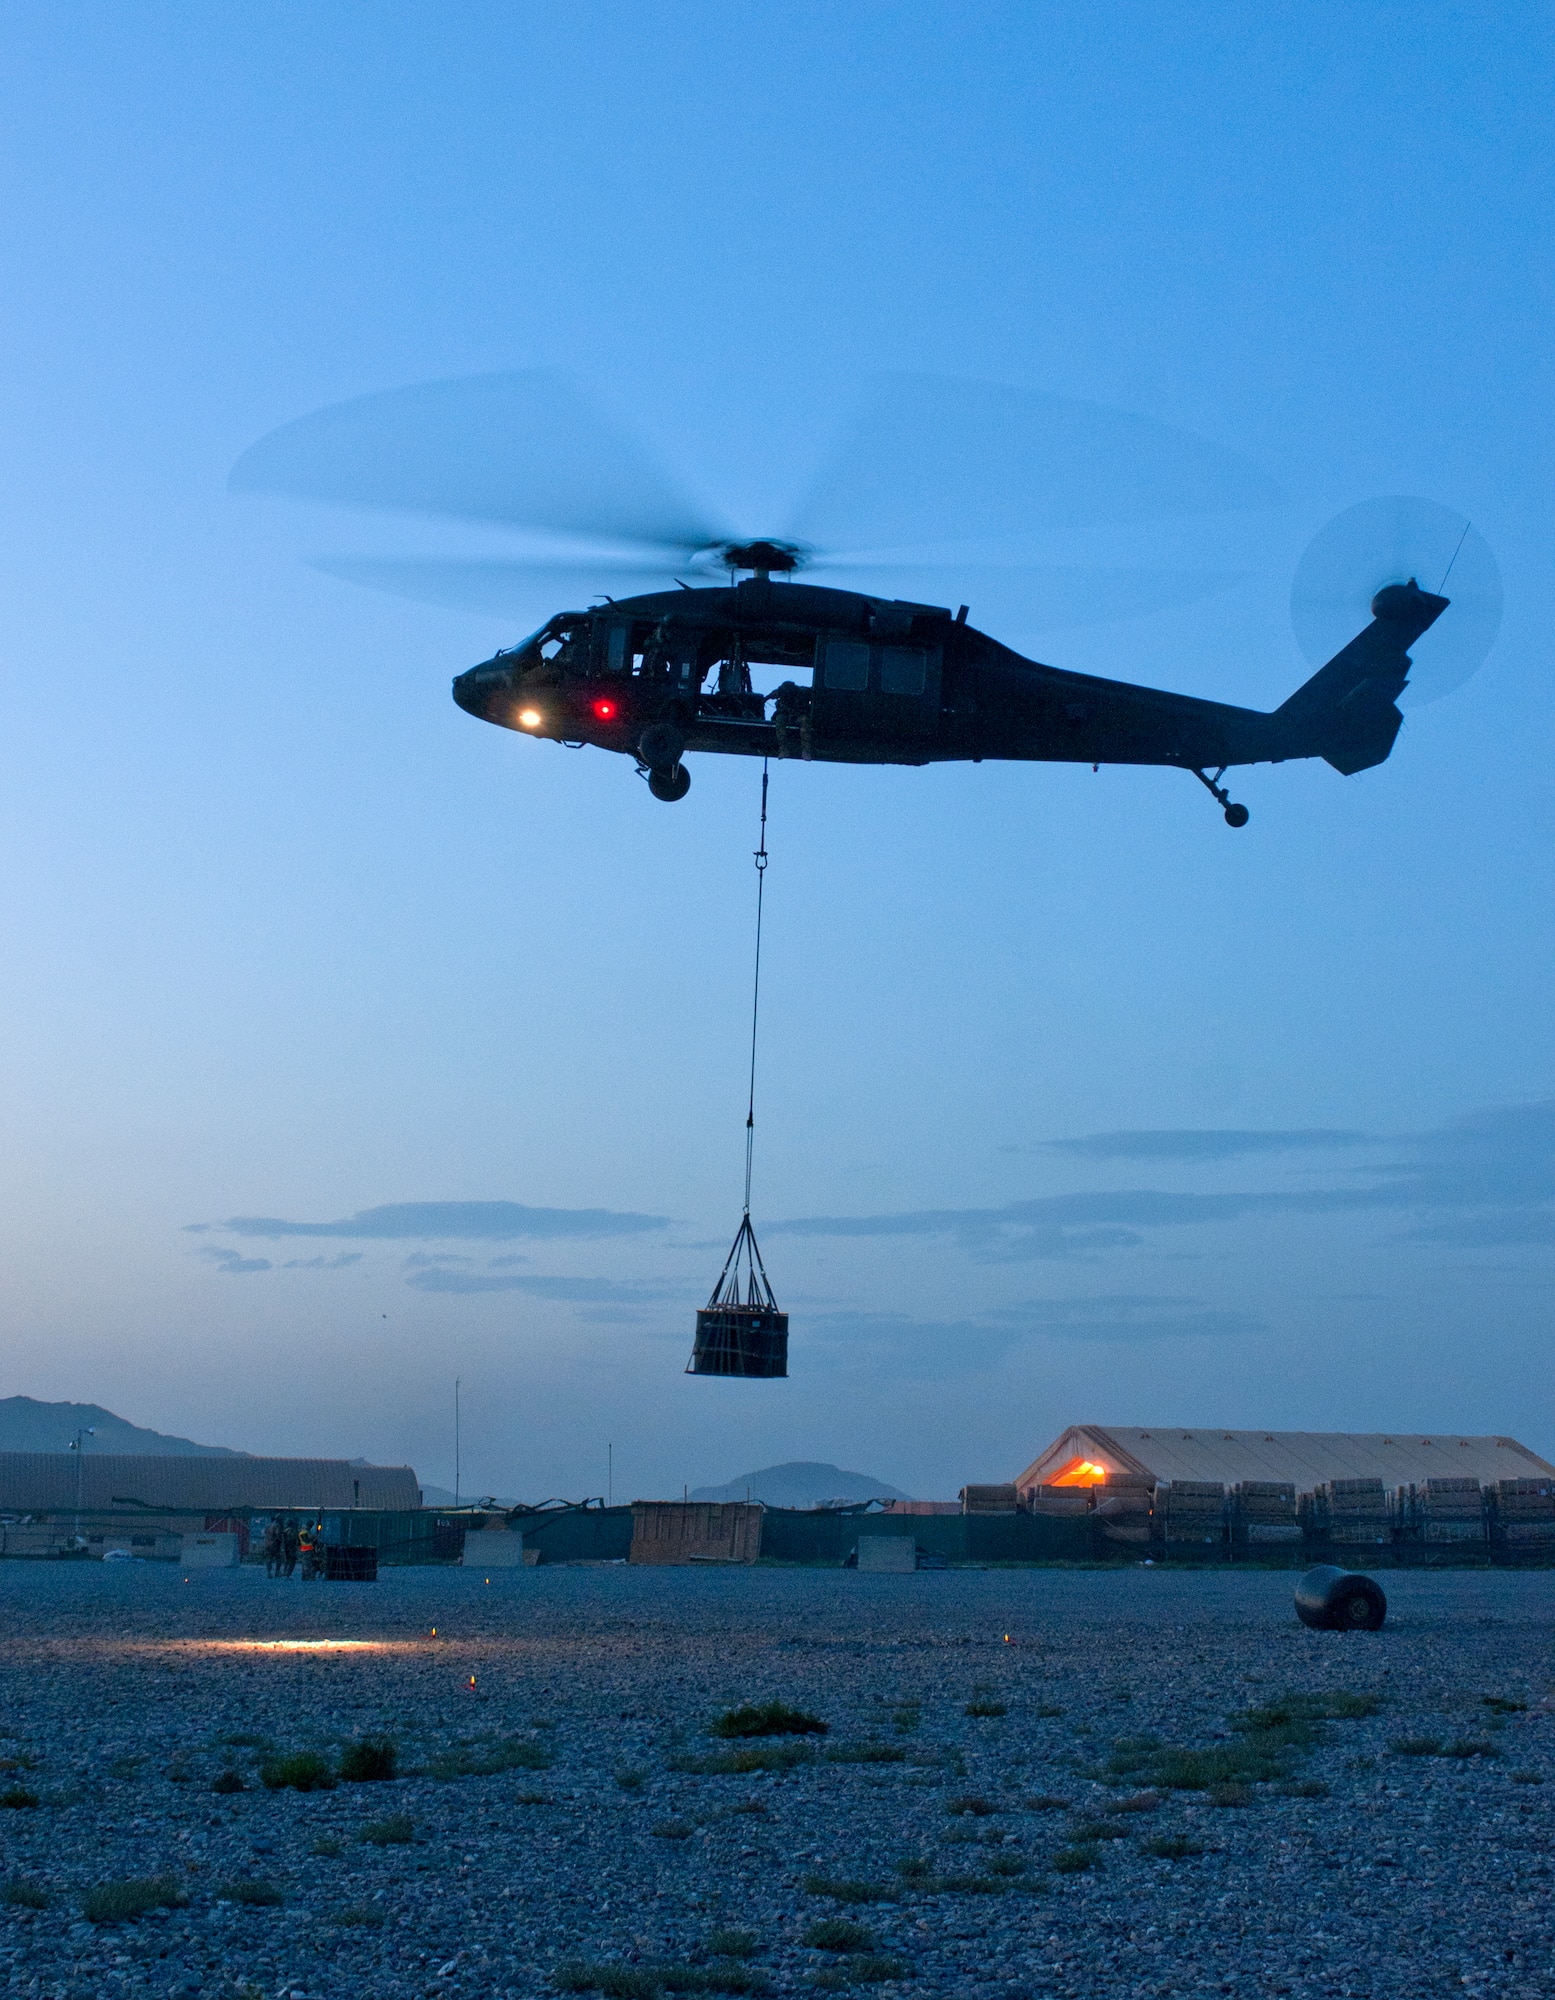 A UH-60 Black Hawk helicopter takes a 1,800 pound A-22 cargo bag away after an in-flight cargo sling-load is executed during a joint-coalition sling load training mission at Kandahar Airfield, Afghanistan, June 1, 2013. The training provided coalition members the opportunity to learn the concepts of marking and illuminating a landing zone as well as in-flight cargo sling loading. (U.S. Air Force photo/Capt. Brian Maguire)